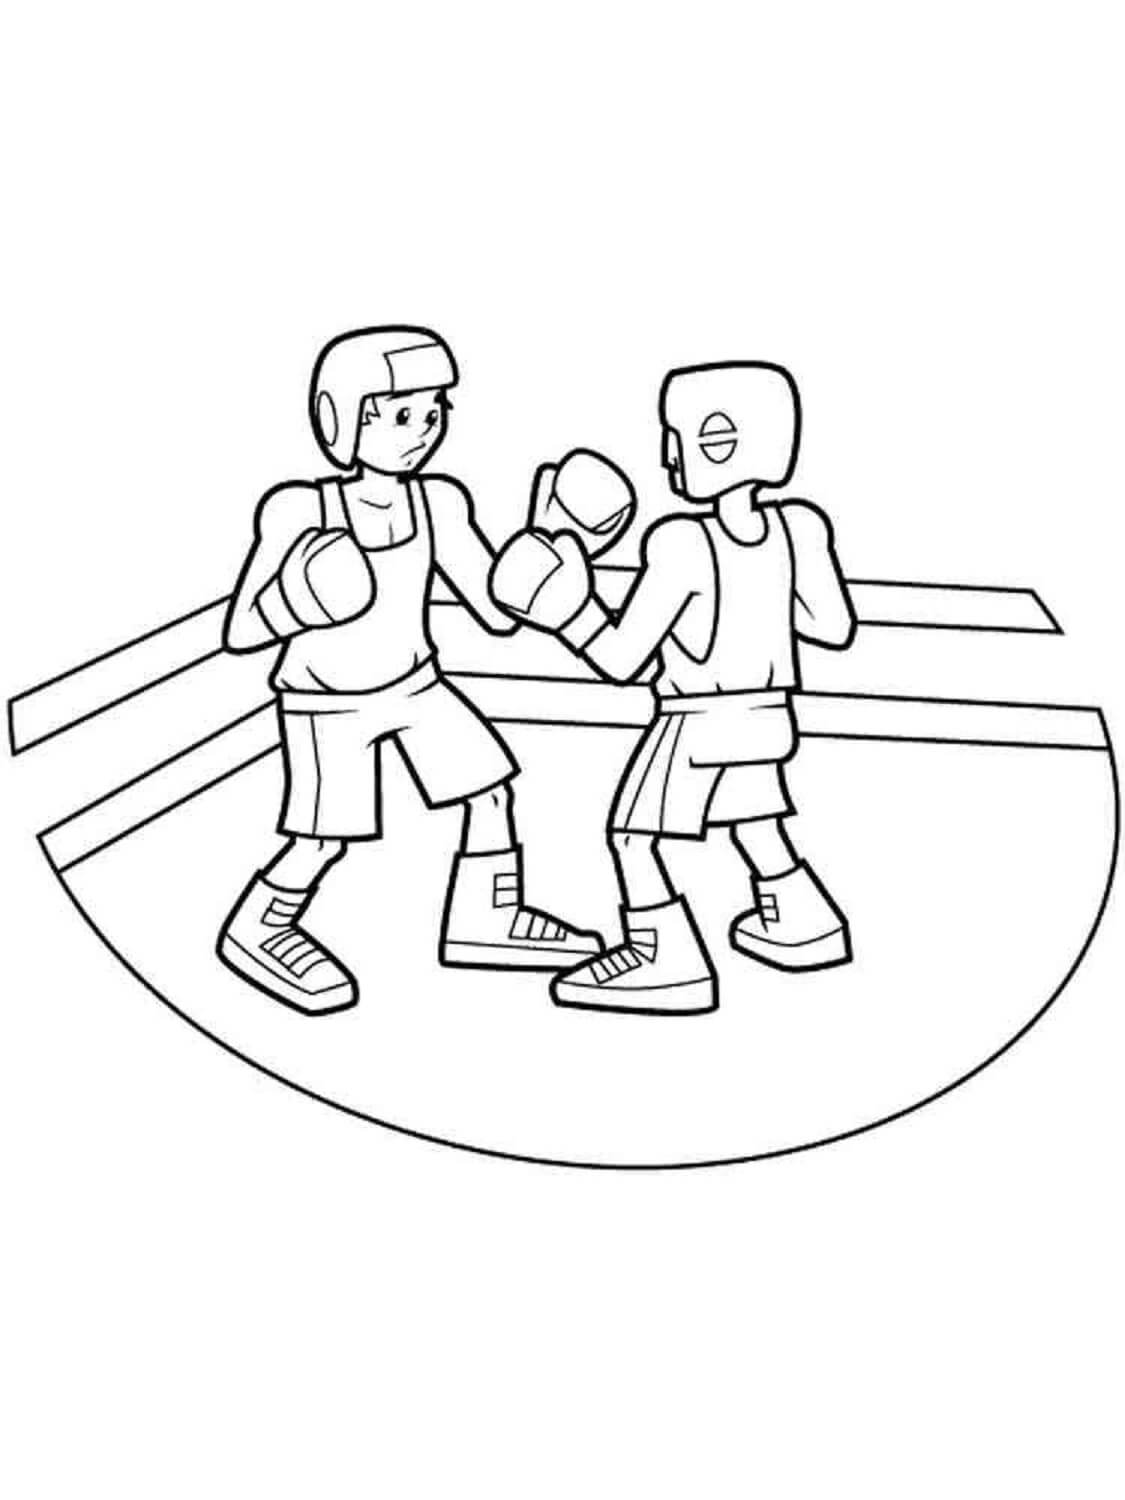 Two Boxing Athletes coloring page